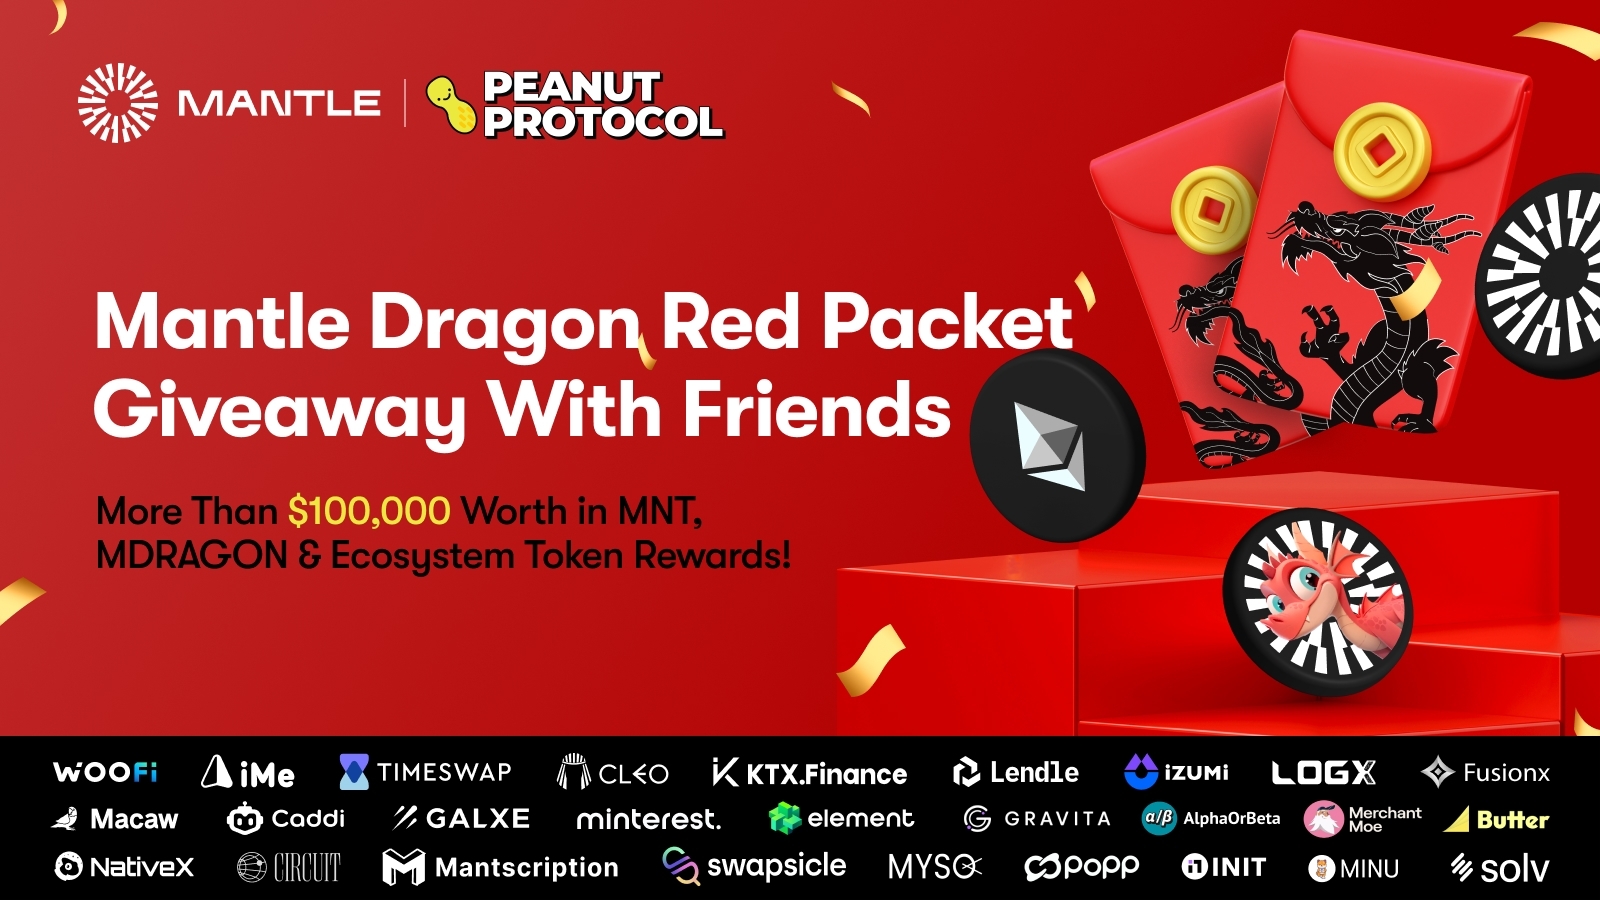 Mantle Dragon Red Packet Giveaway With Peanut Protocol